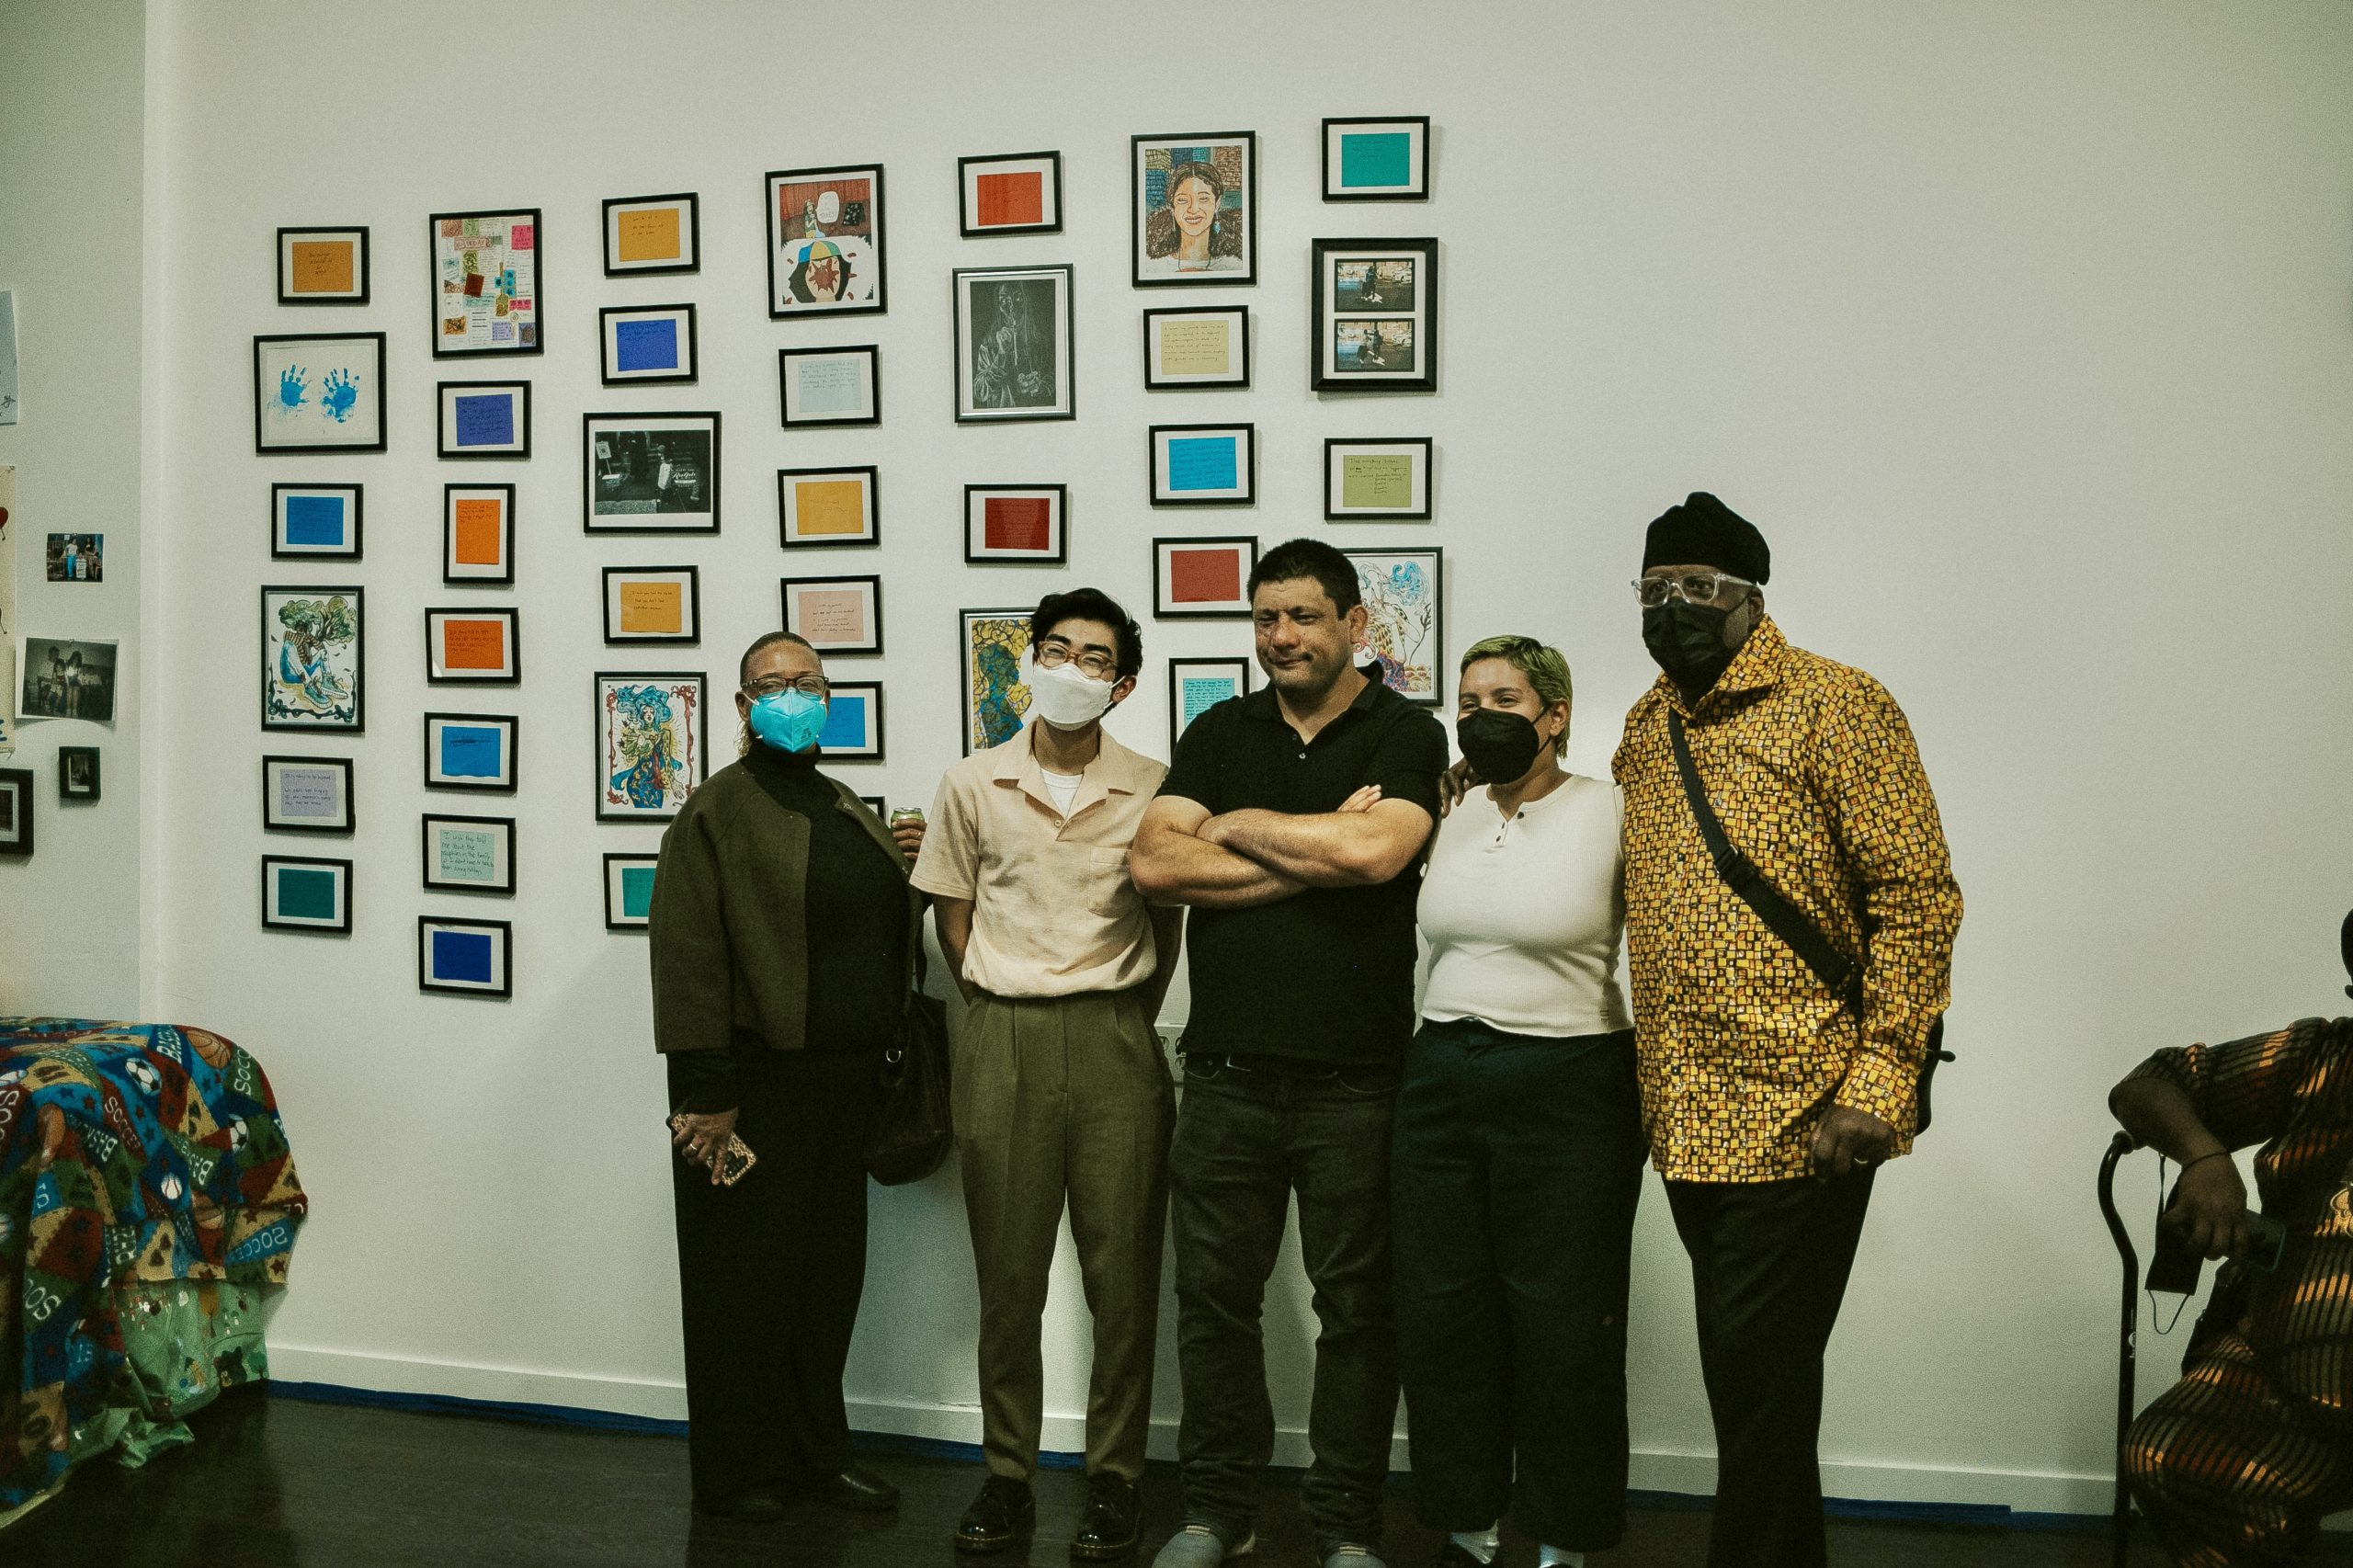 Rite of Passage Exhibition artists posing against an art gallery wall